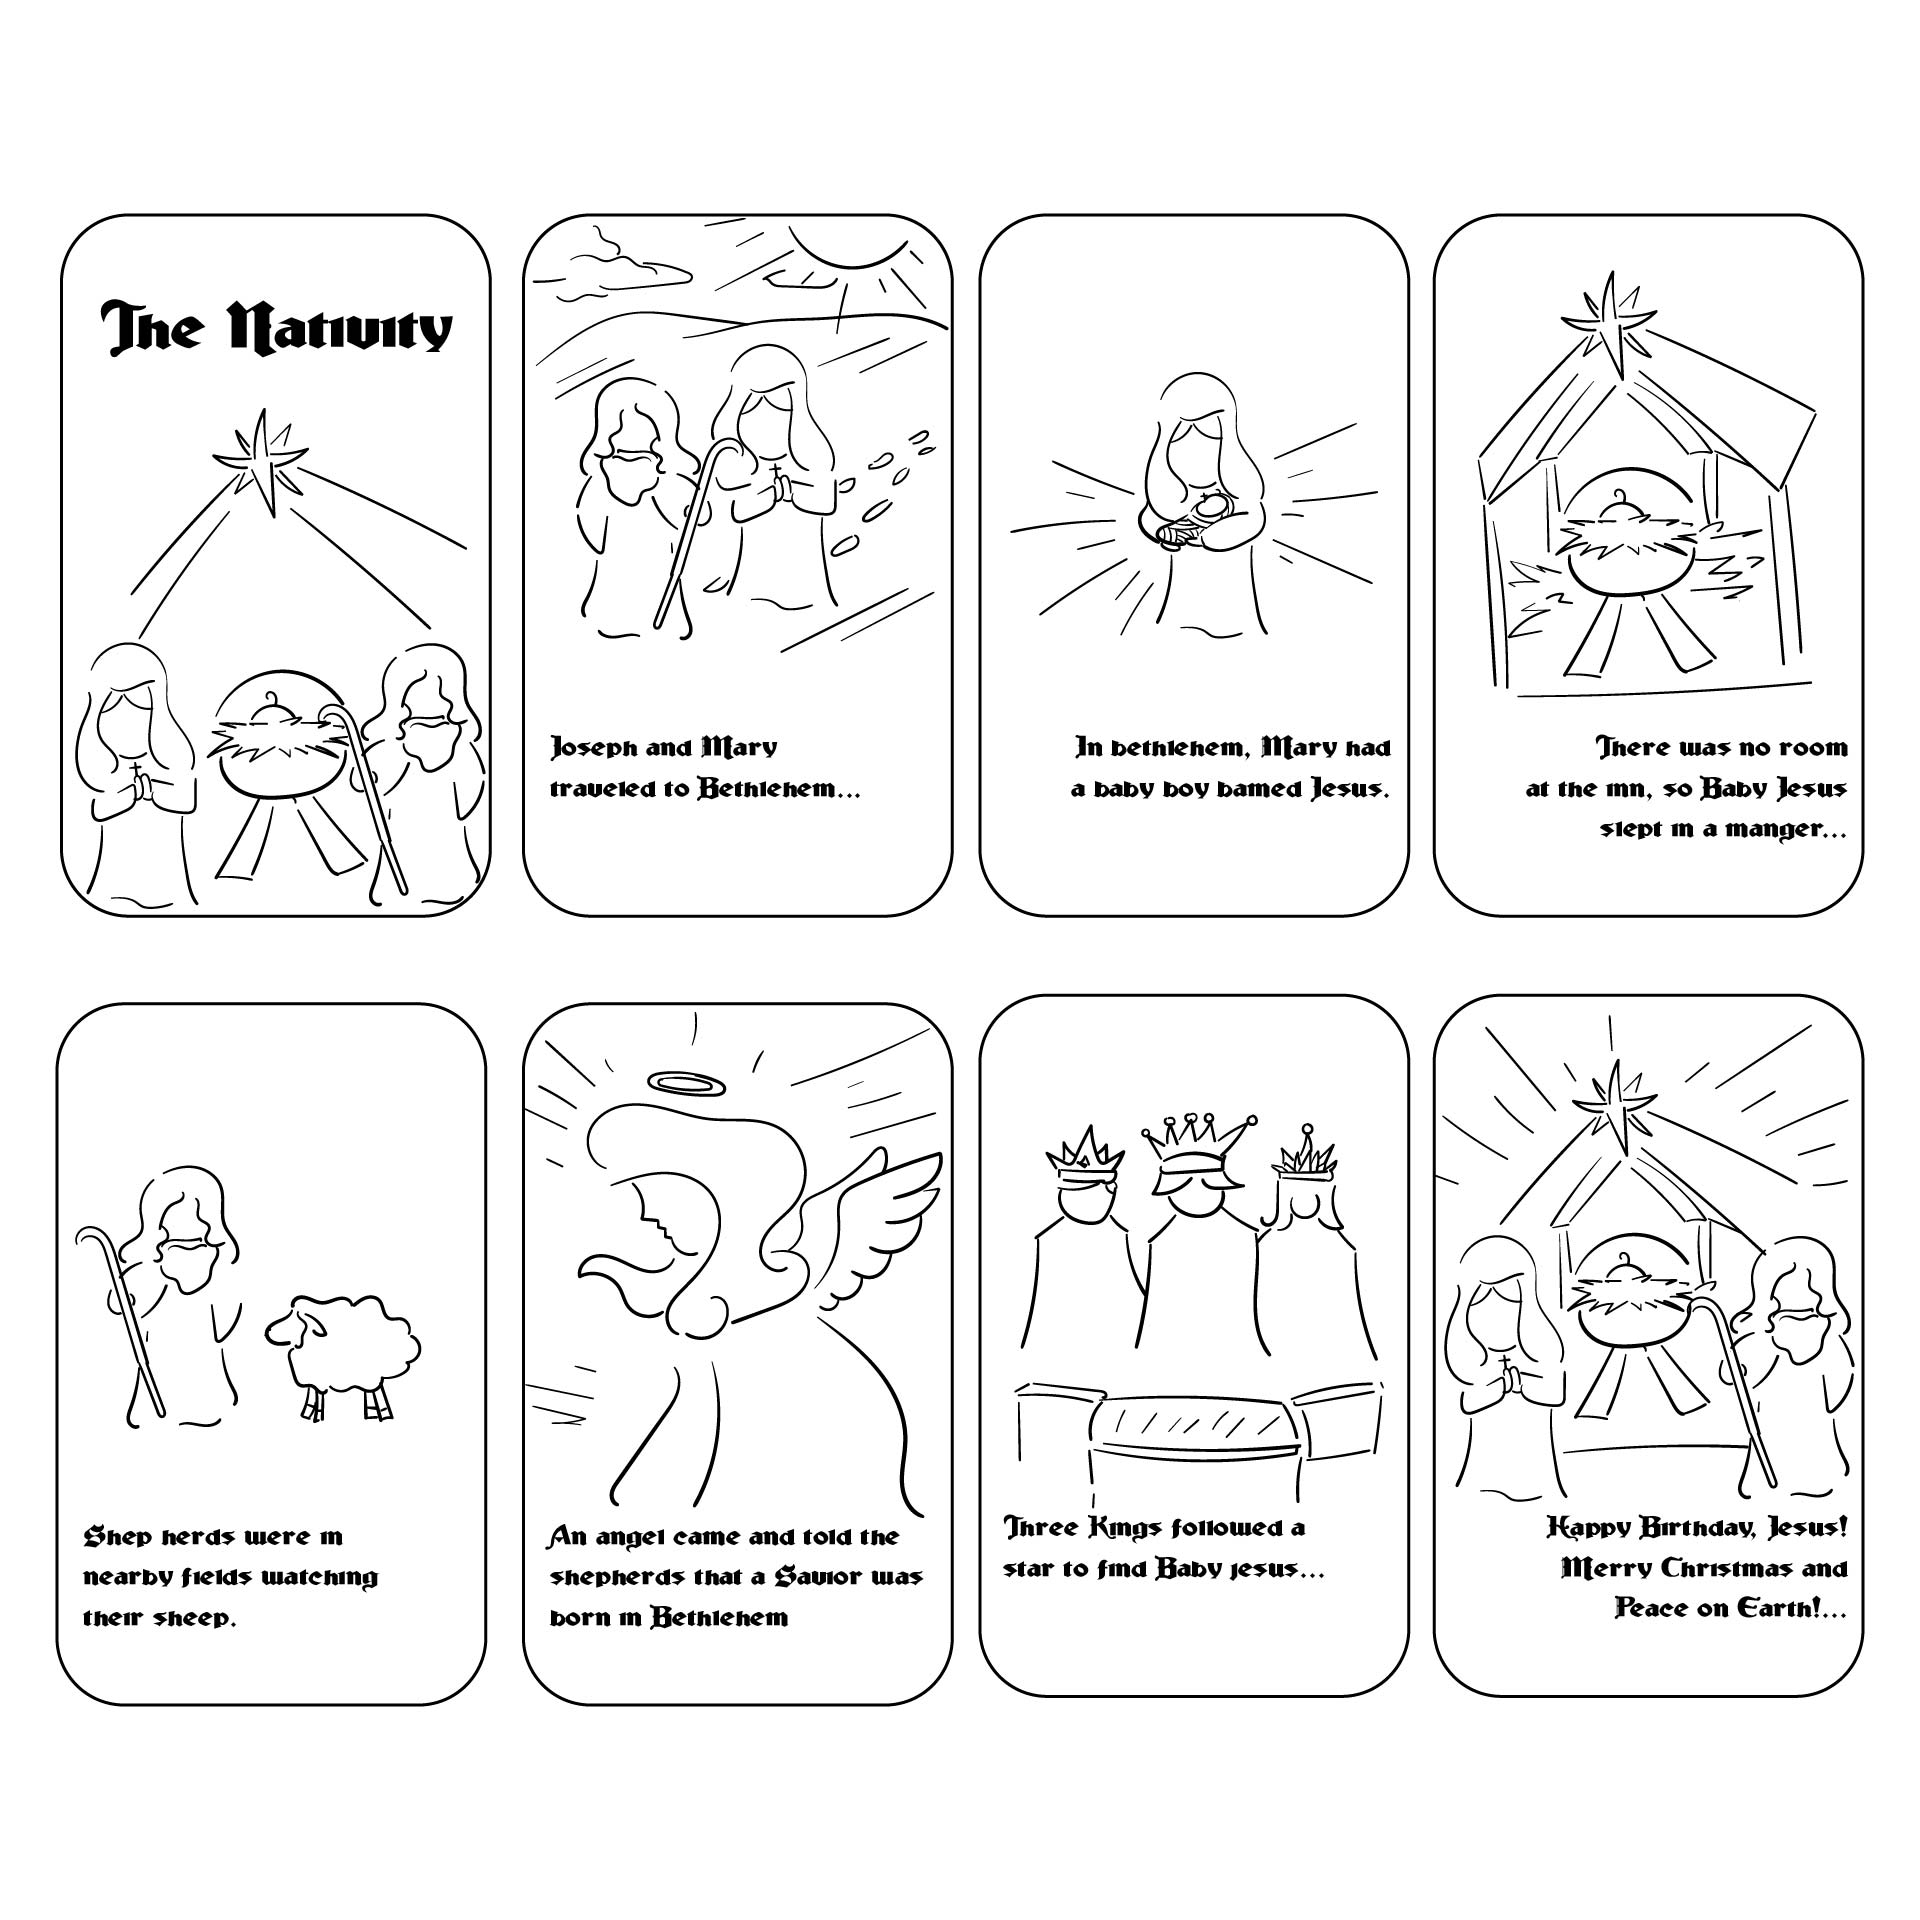 7-best-images-of-nativity-story-printable-book-printable-nativity-story-for-children-nativity